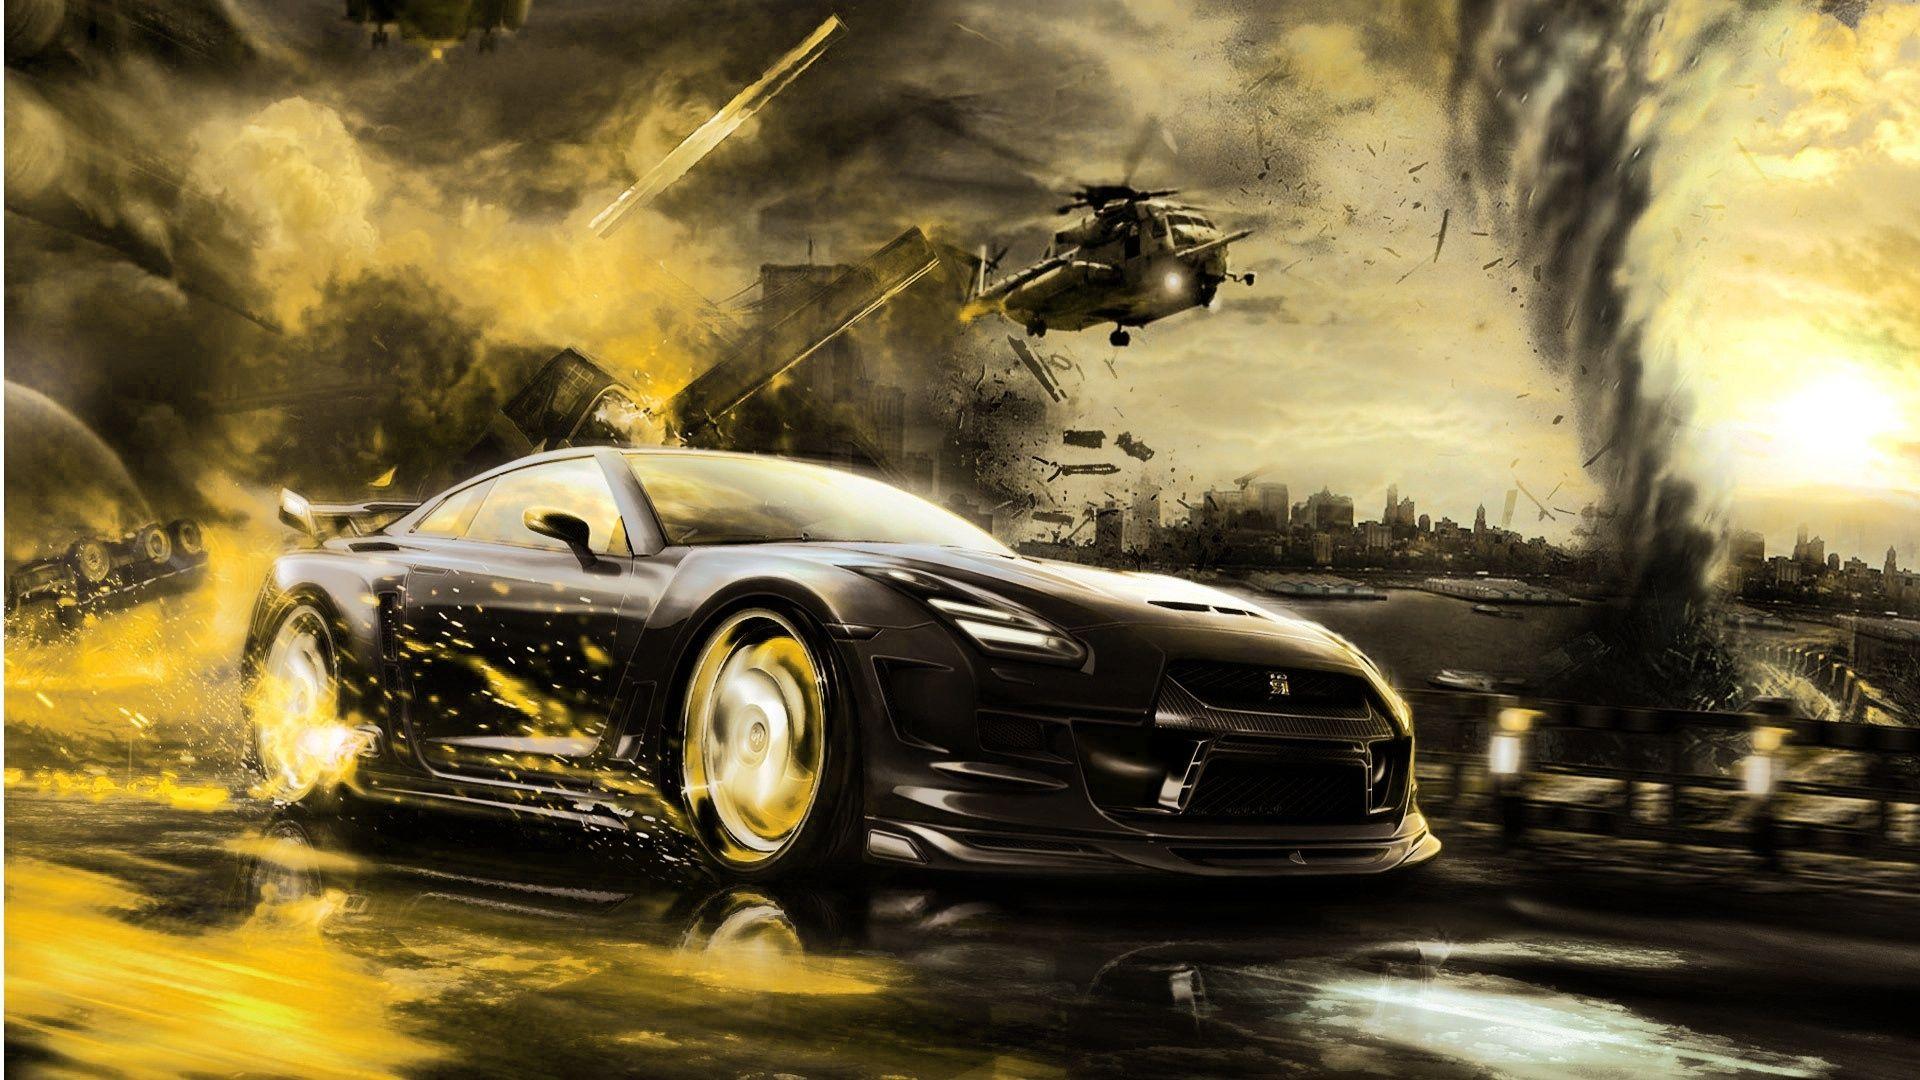 78300+ Vehicles HD Wallpapers and Backgrounds